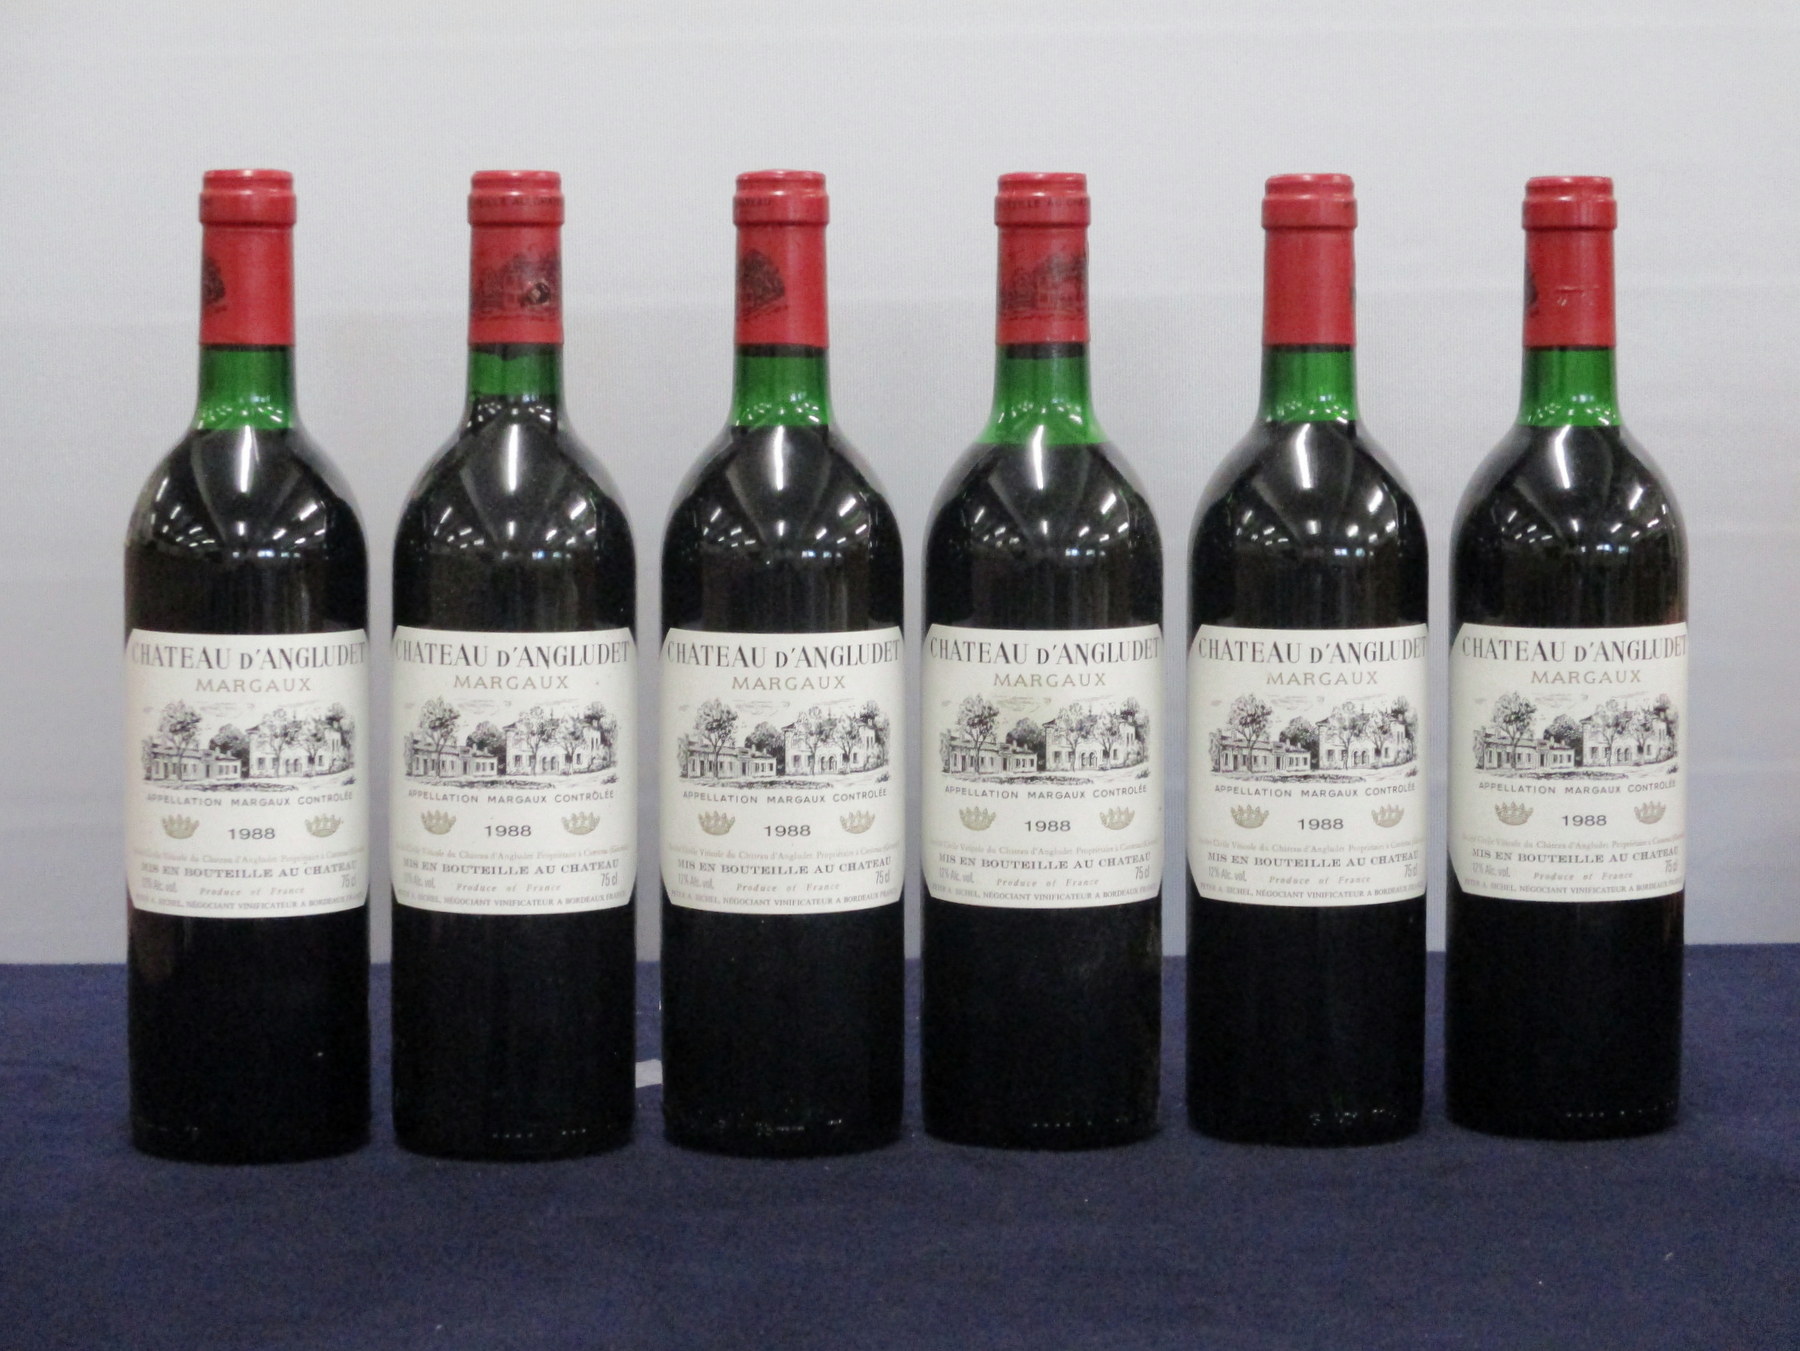 6 bts Ch. d'Angludet 1988 Cantenac (Margaux) Cru Bourgeois Exceptionnel 1 i.n, 3 ts, 1 us/ts, 1 us